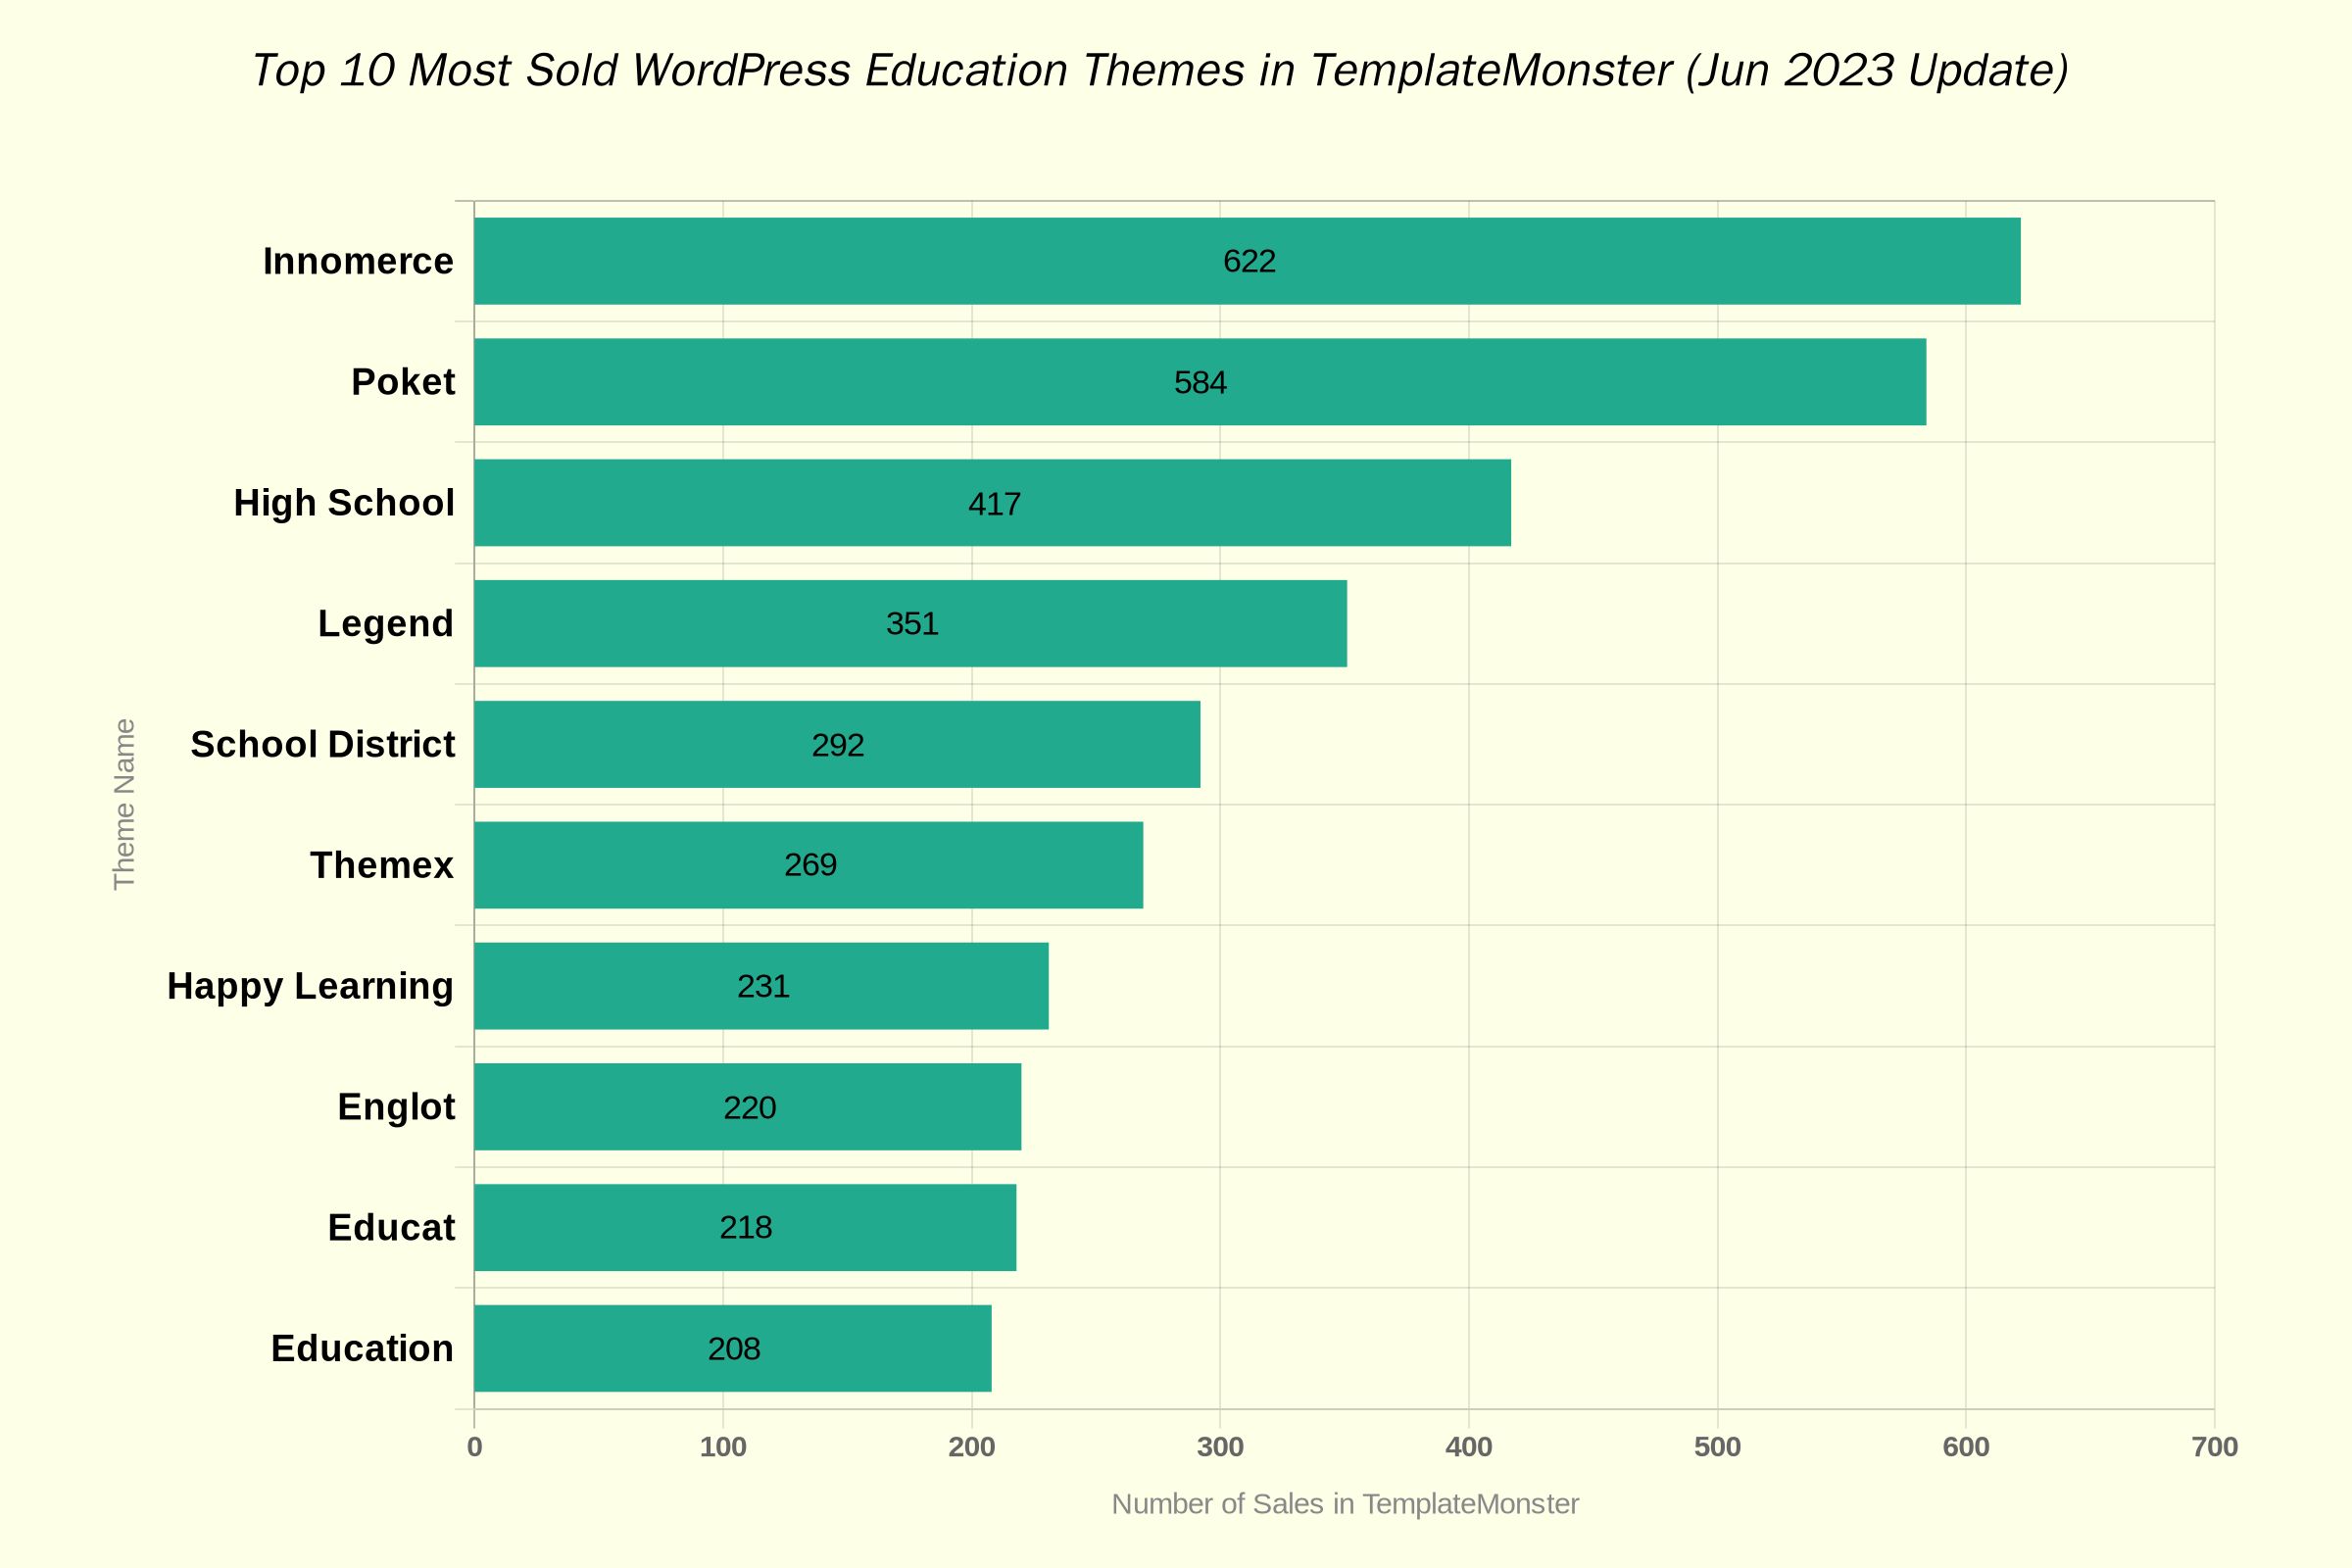 Top 10 most-sold education themes on TemplateMonster until June 2023